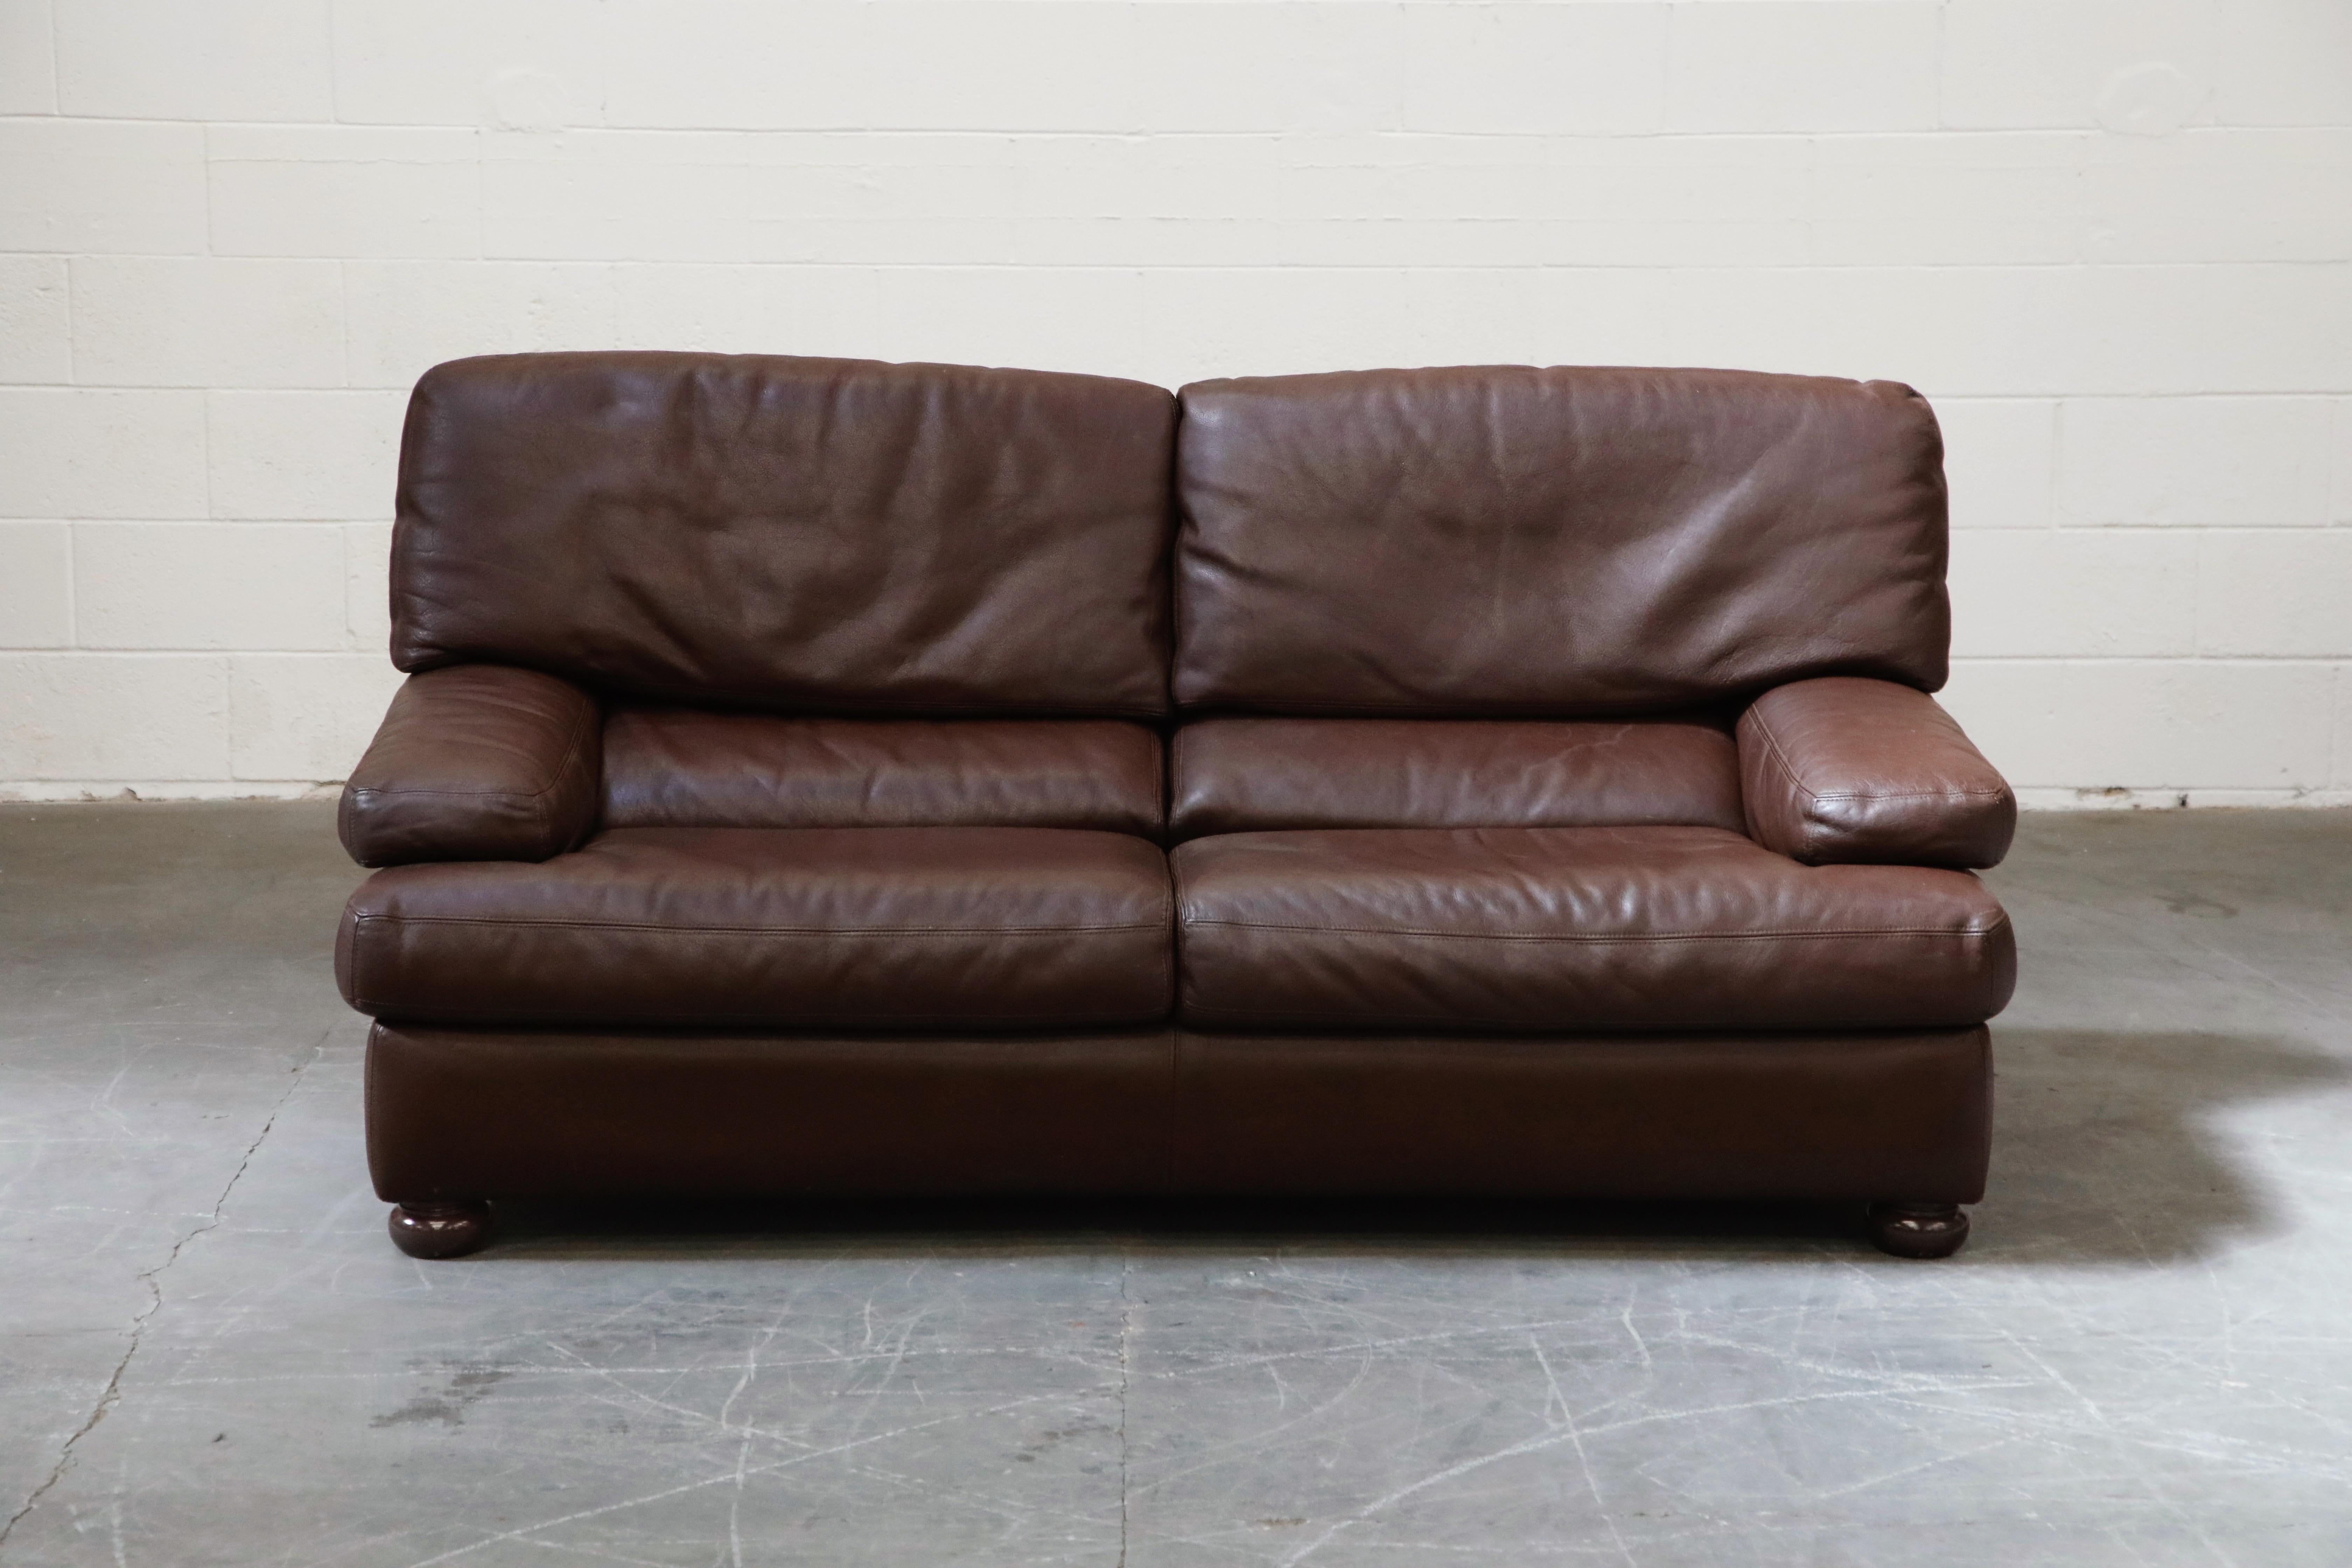 Soft comfortable leather and incredible Post-Modern style in this living room set by Roche Bobois, Paris France, circa 1980s, consisting of a one loveseat and two club chairs. The deep brown colored leather is the high quality you would expect from